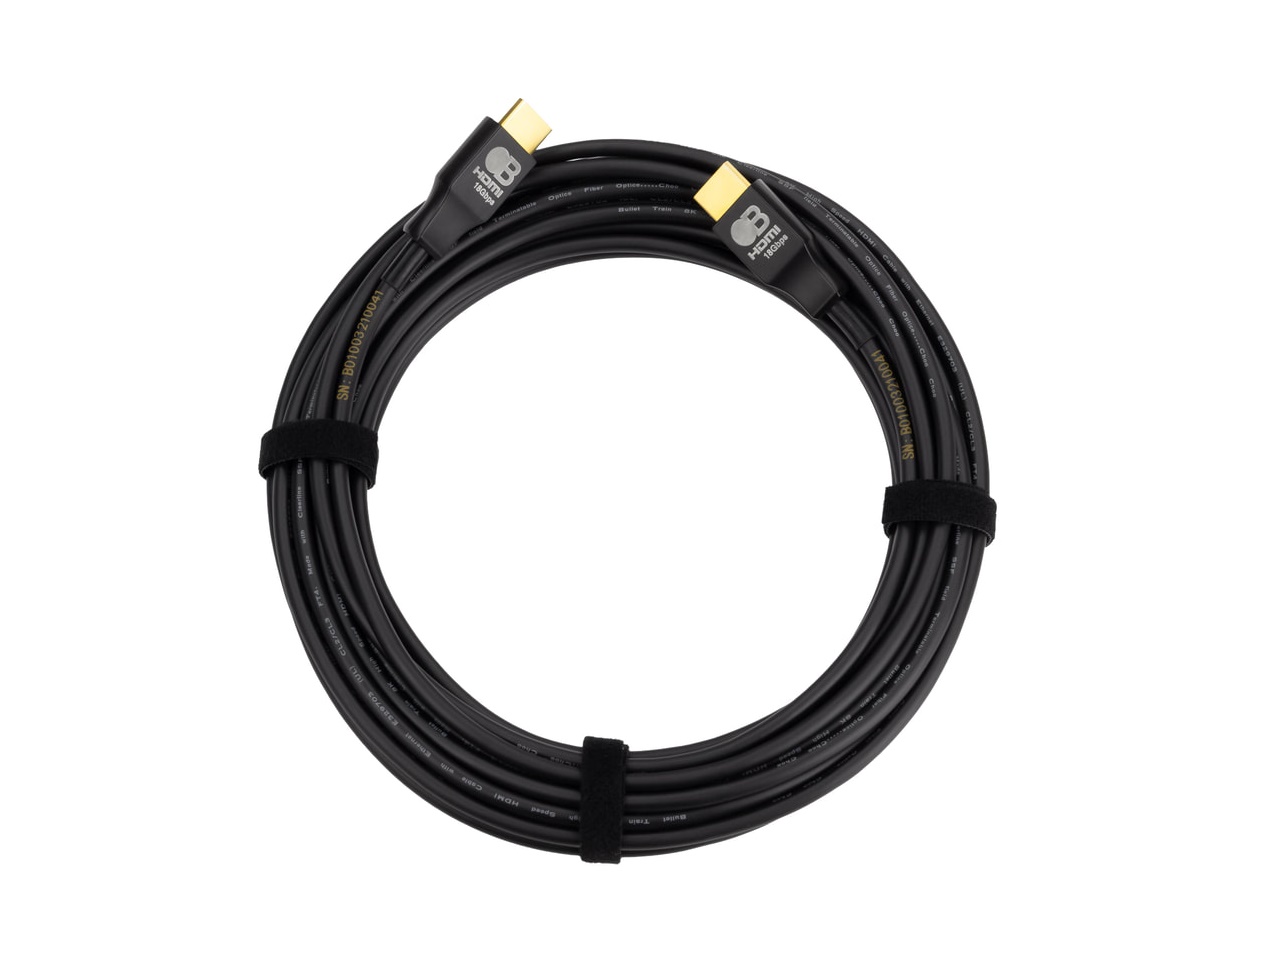 10 Meter (32.8 FT) High Speed HDMI Cable with Ethernet